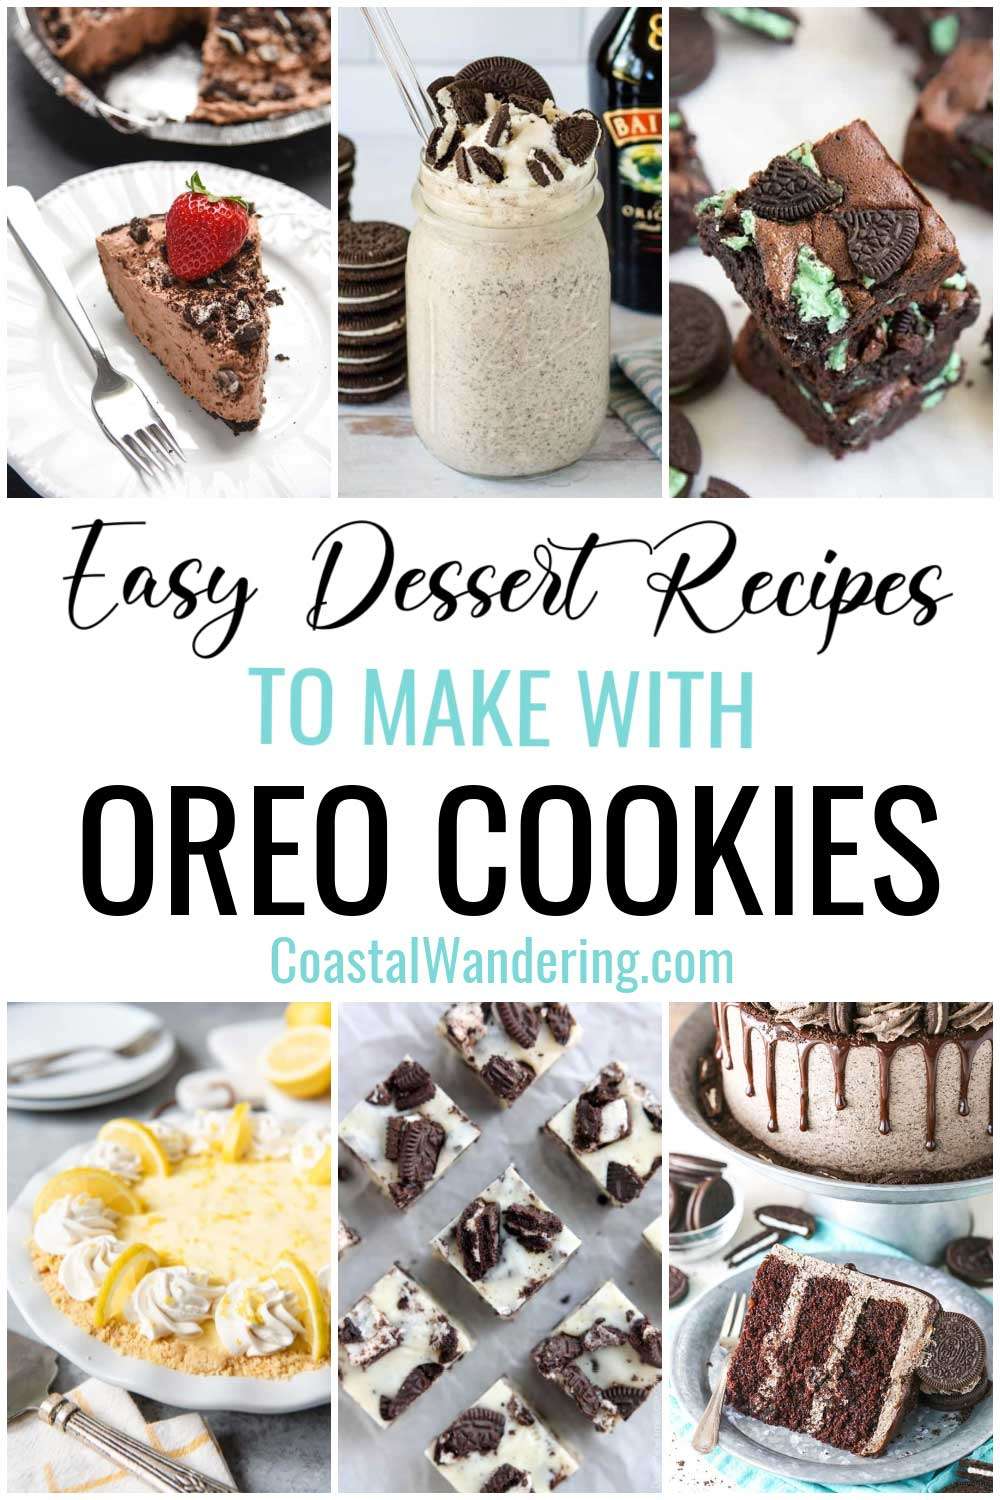 21 Easy Dessert Recipes To Make With Oreo Cookies - Coastal Wandering